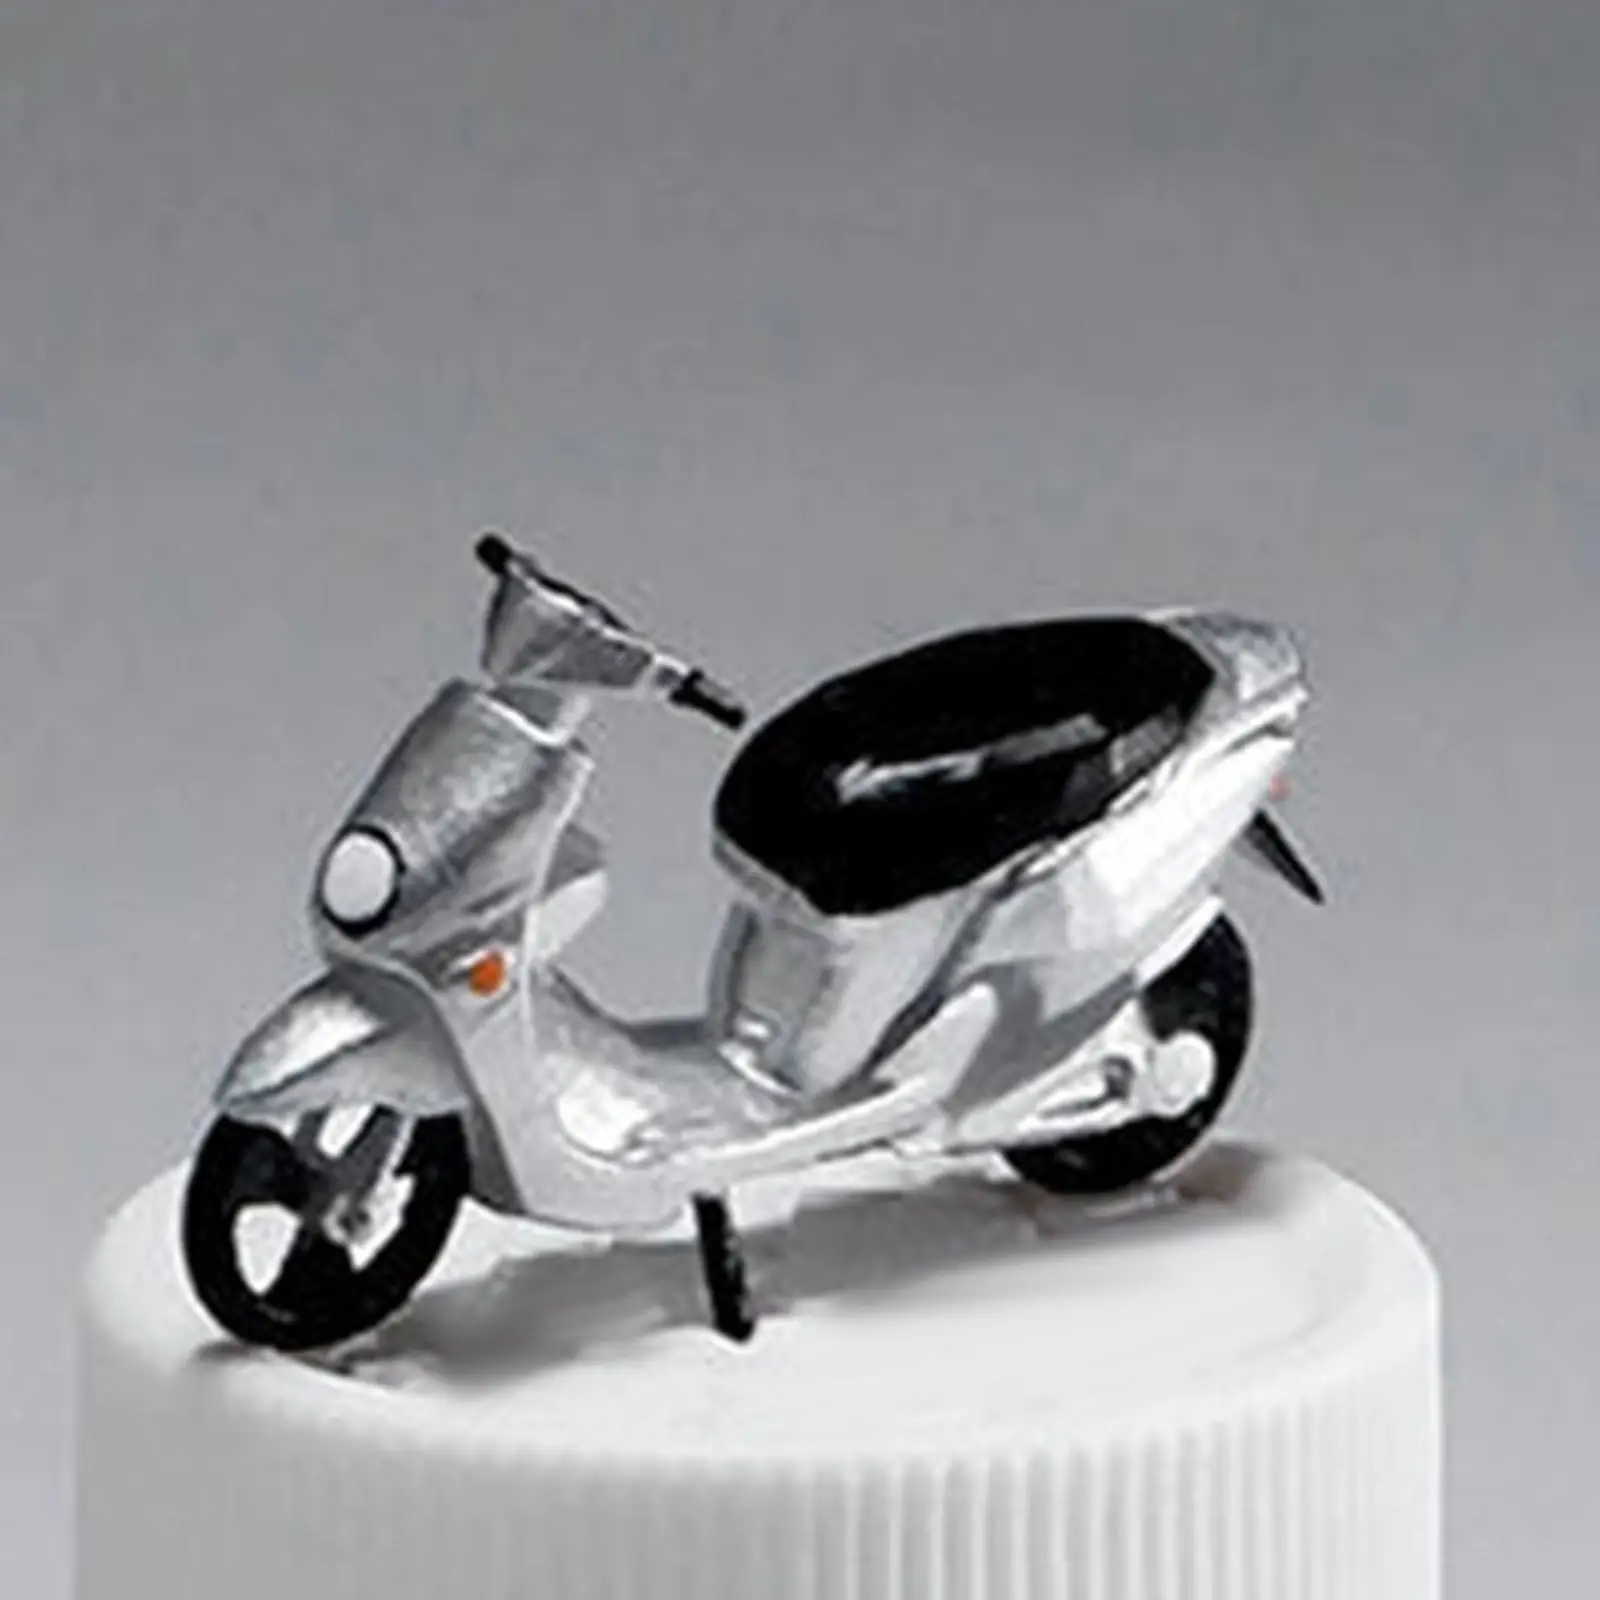 Miniature Autobike Model Ornament Collectibles Resin Hand Painted 1:64 Scale for